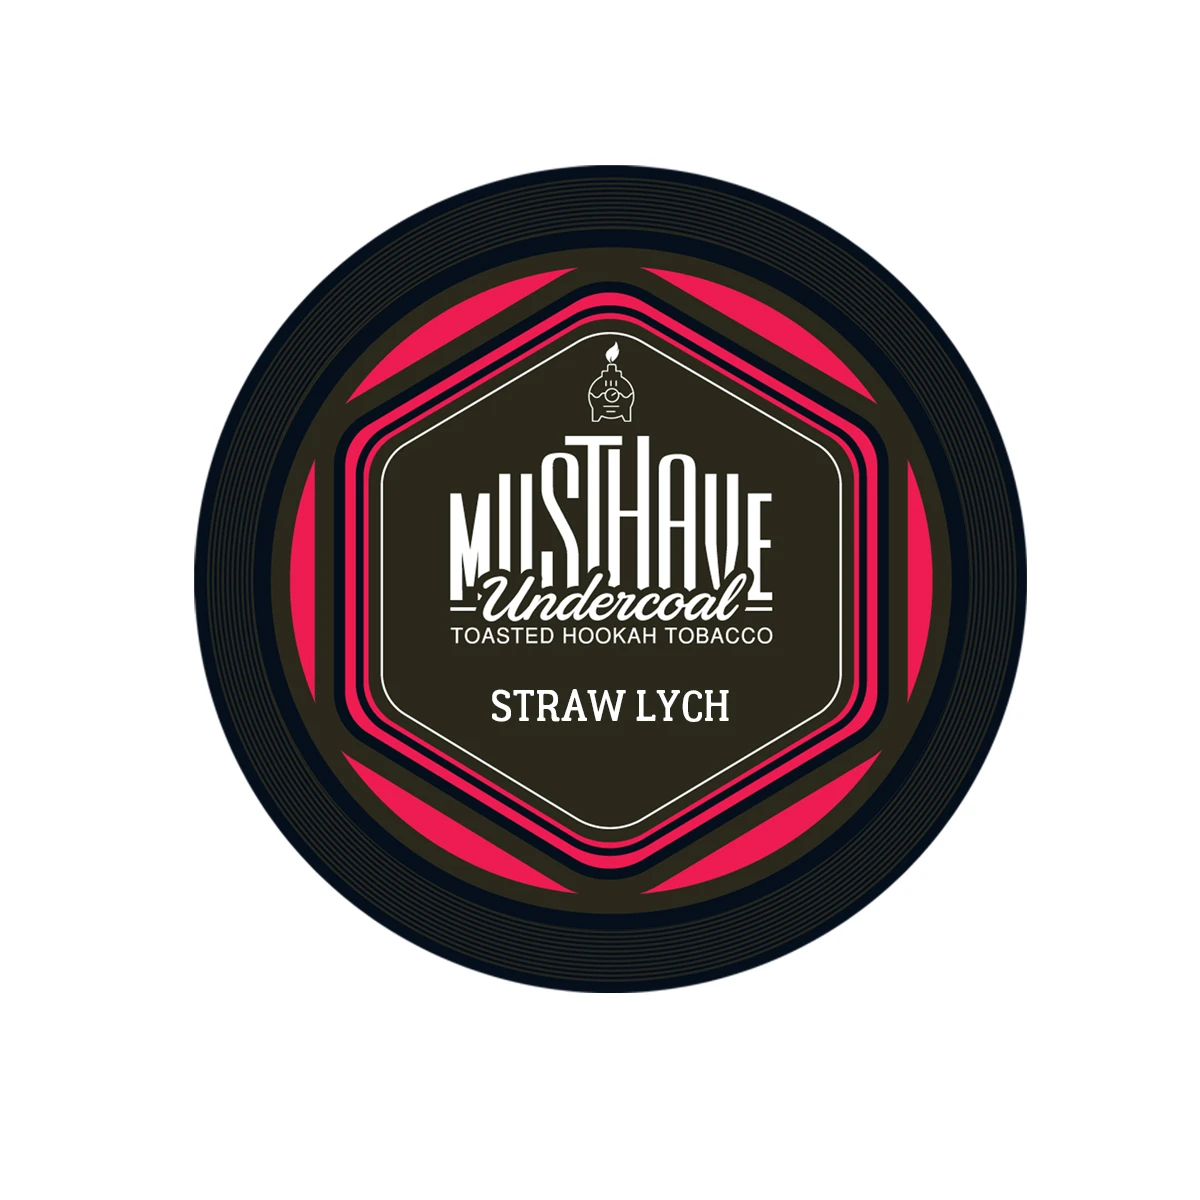 Musthave Tabak 25g Straw Lych